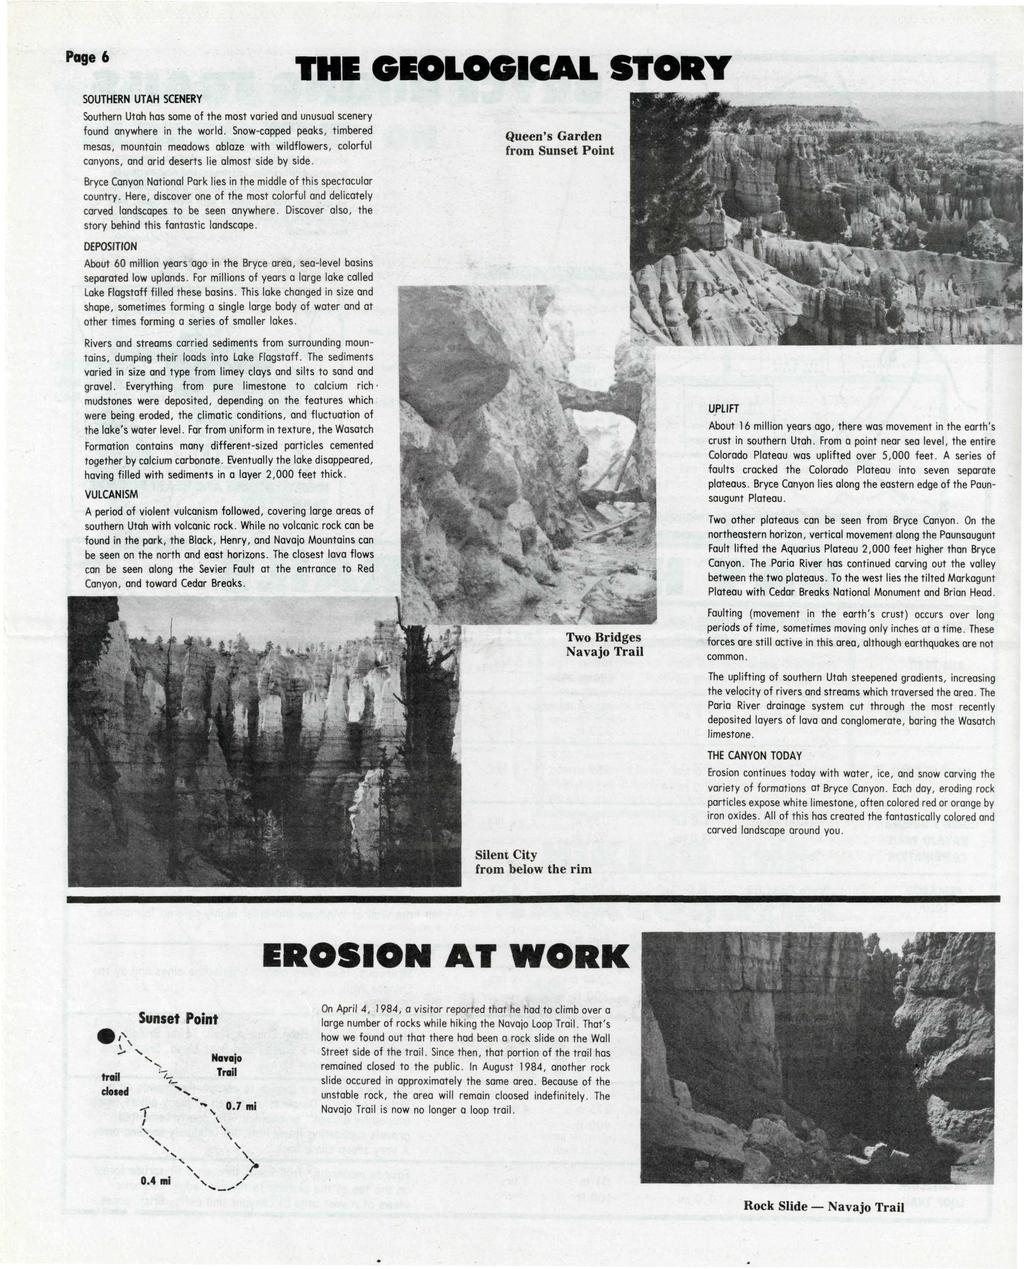 Page 6 THE GEOLOGICAL STORY SOUTHERN UTAH SCENERY Southern Utah has some of the most varied and unusual scenery found anywhere in the world.